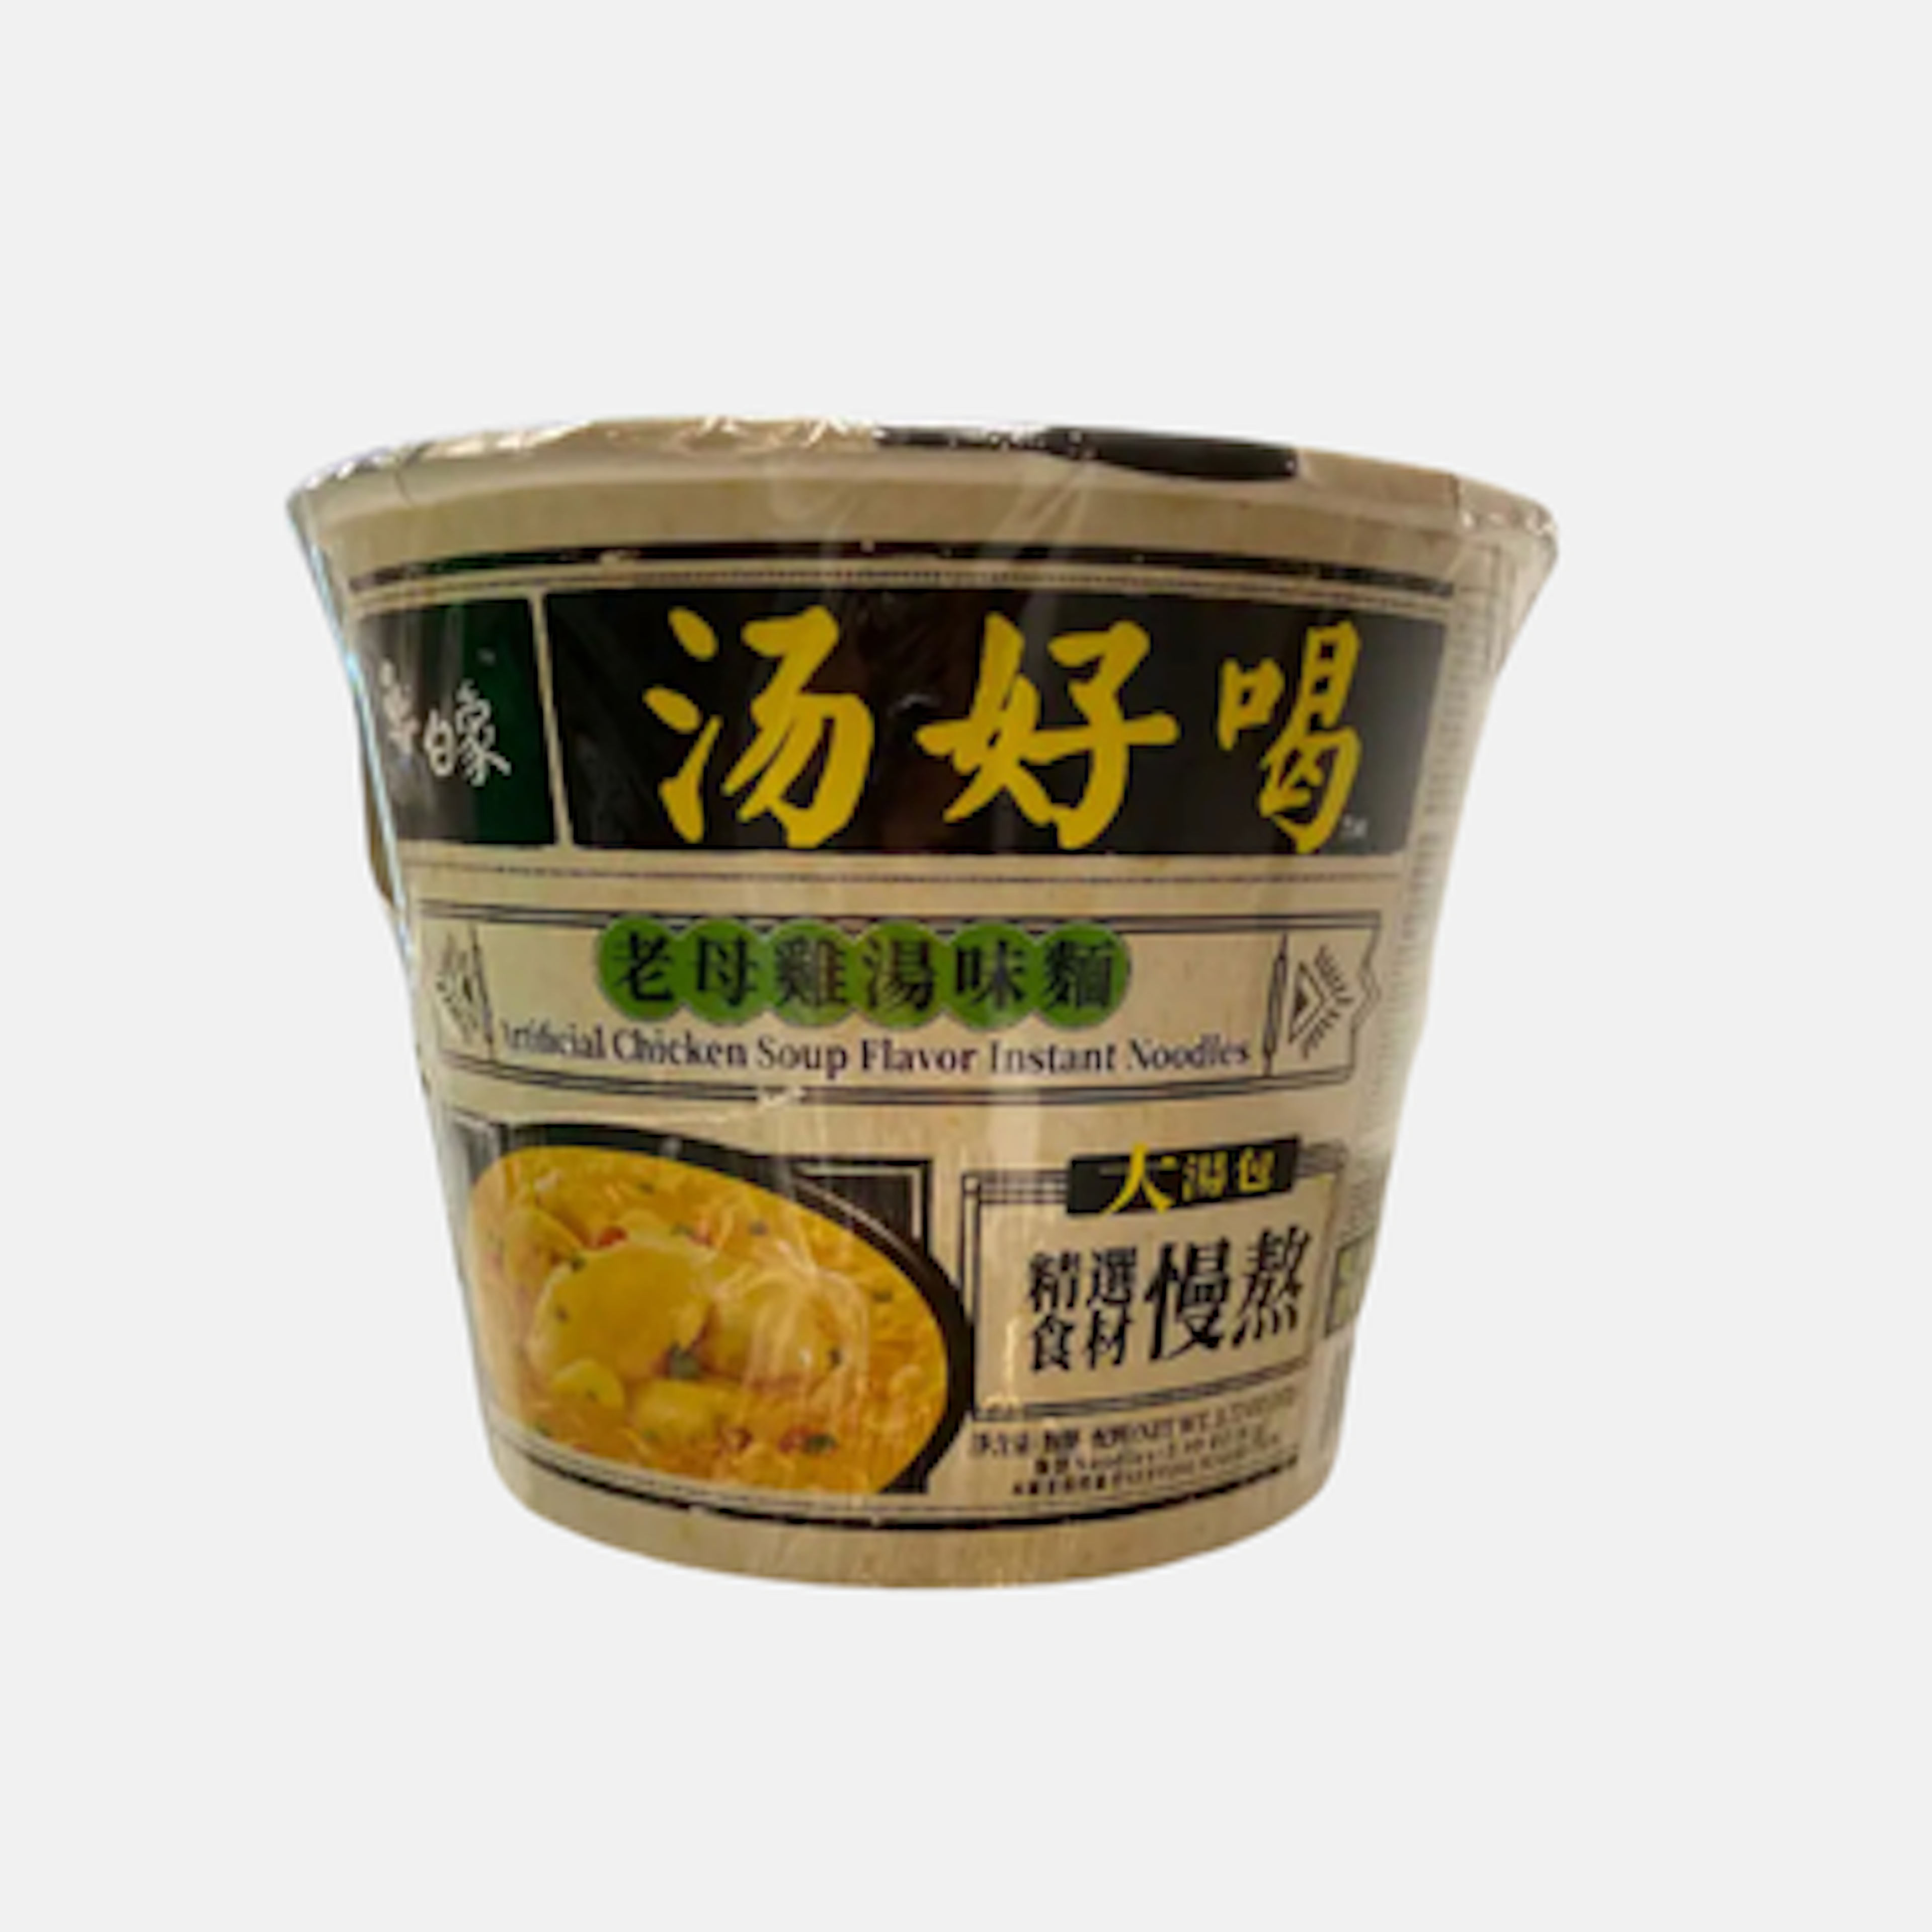 Baixiang Instant-Nudeln Hühnersuppe Geschmack - Leckere Instant-Nudeln mit Hühnersuppe Geschmack, Cup, 107g